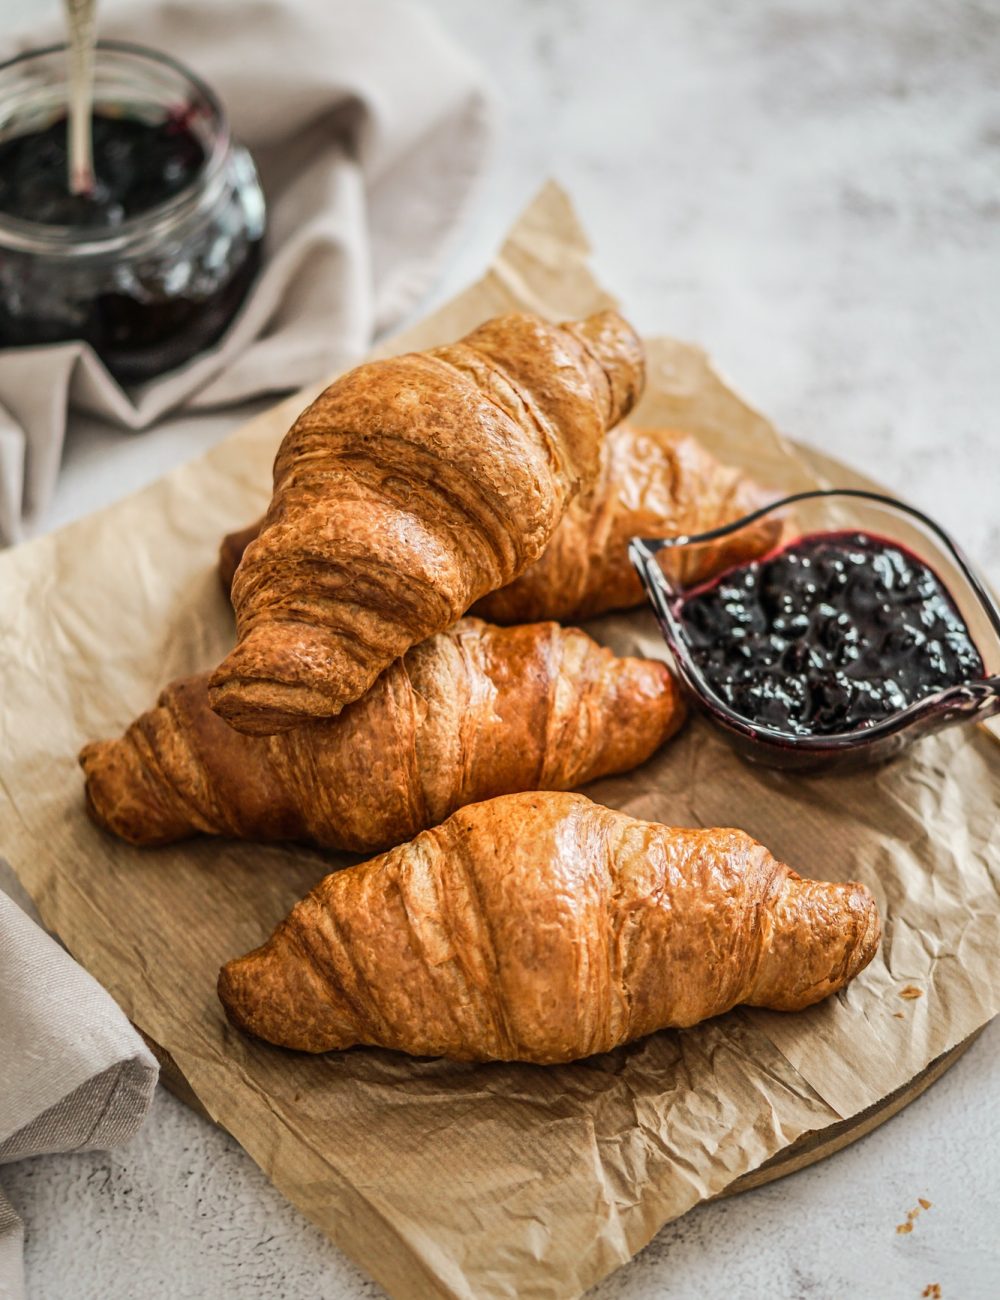 french-fresh-croissant-with-blackberry-jam-on-a-bakery-paper-and-grey-background.jpg